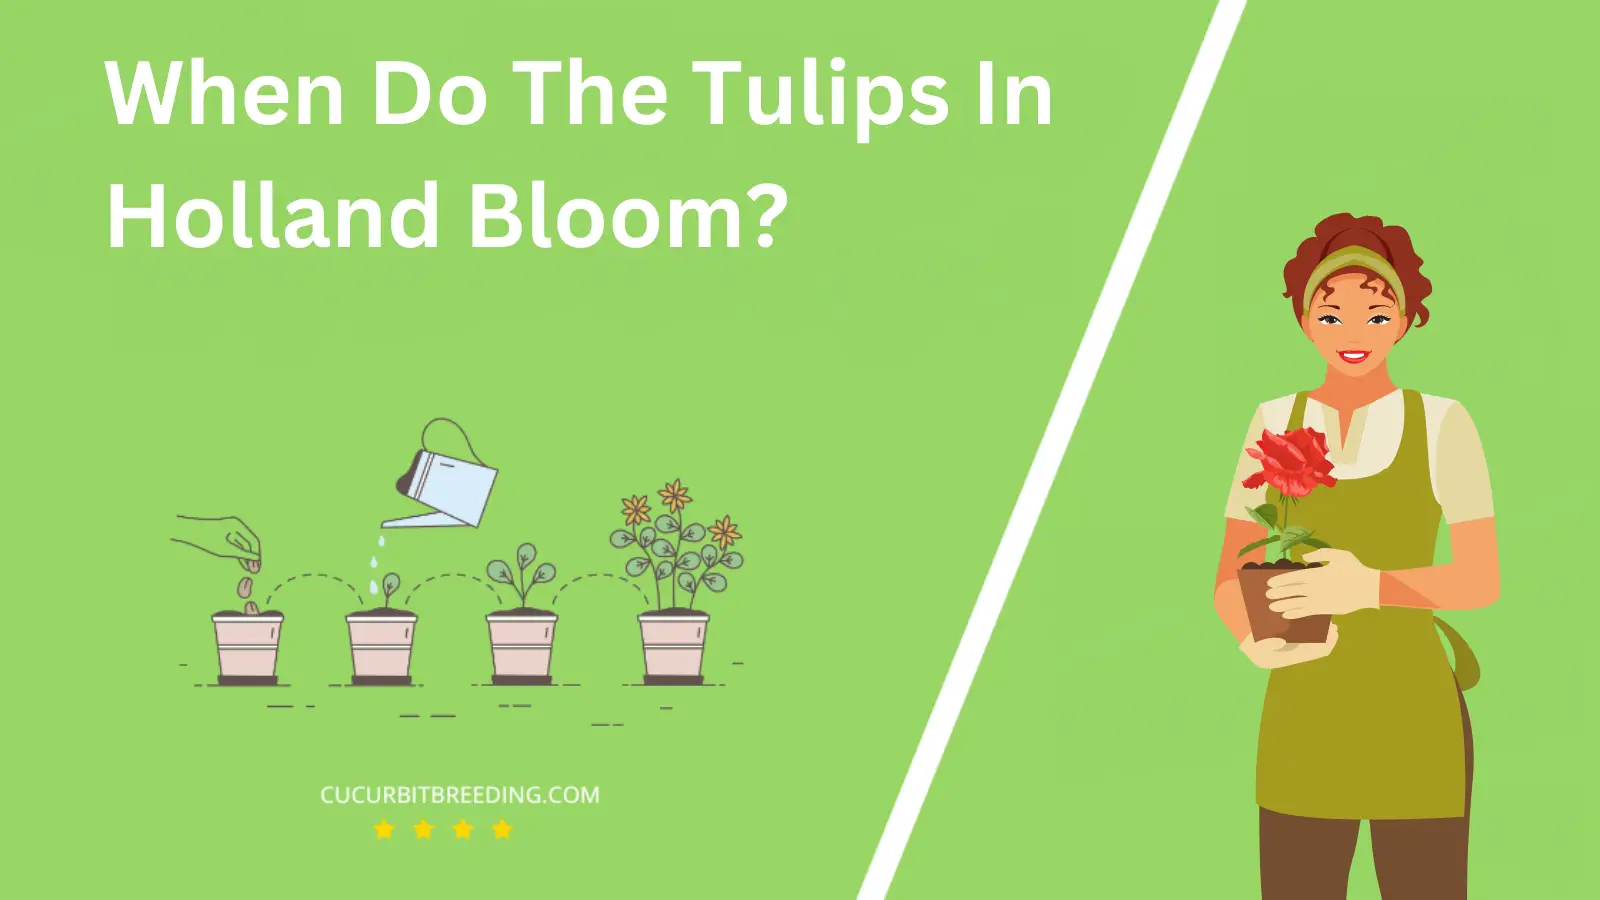 When Do The Tulips In Holland Bloom?